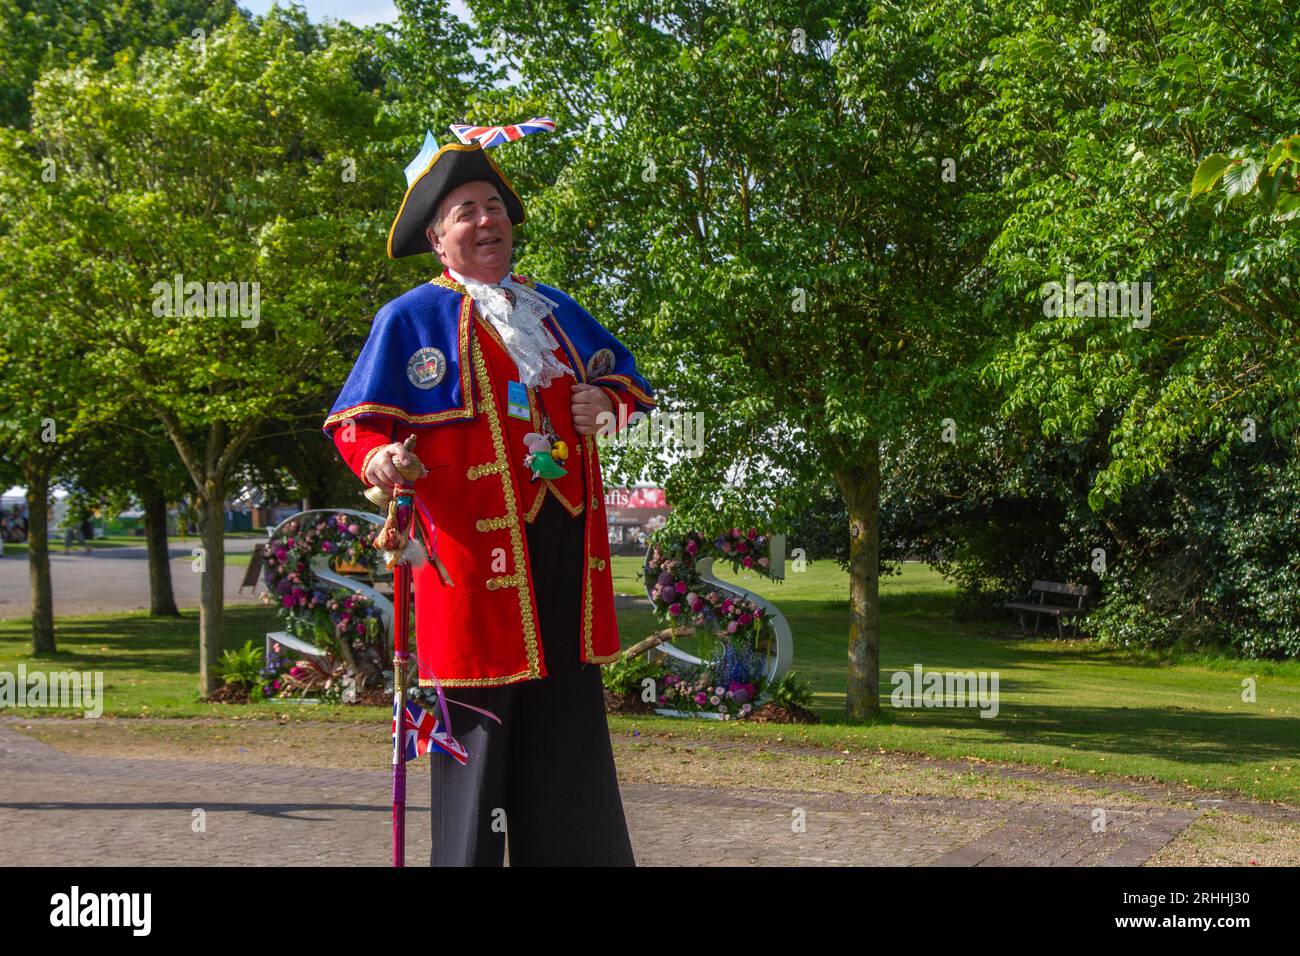 Southport, Merseyside.  17 Aug 2023 UK Weather. A sunny start in the north-west as patrons arrive for the four-day spectacular flower show, to be greeted by multi-coloured G-Models in brightly coloured costumes.  Professor Crump welcomes visitors to the botanical extravaganza. Credit; MediaWorldImages/AlamyLiveNews Stock Photo